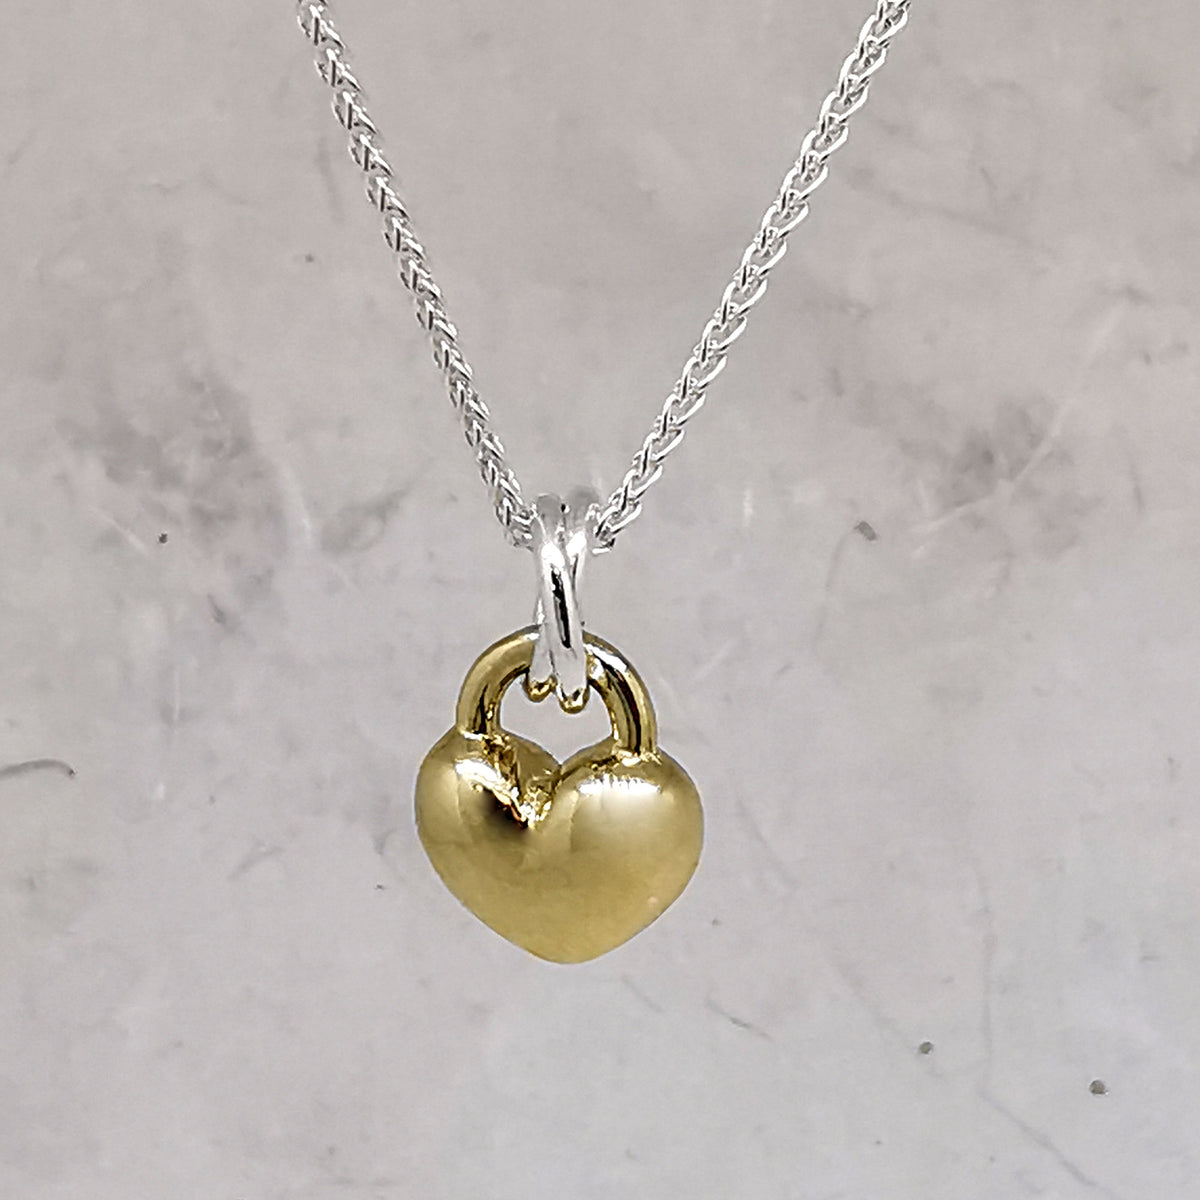 solid gold and silver love heart pendant necklace romantic anniversary gift for girlfriend wife